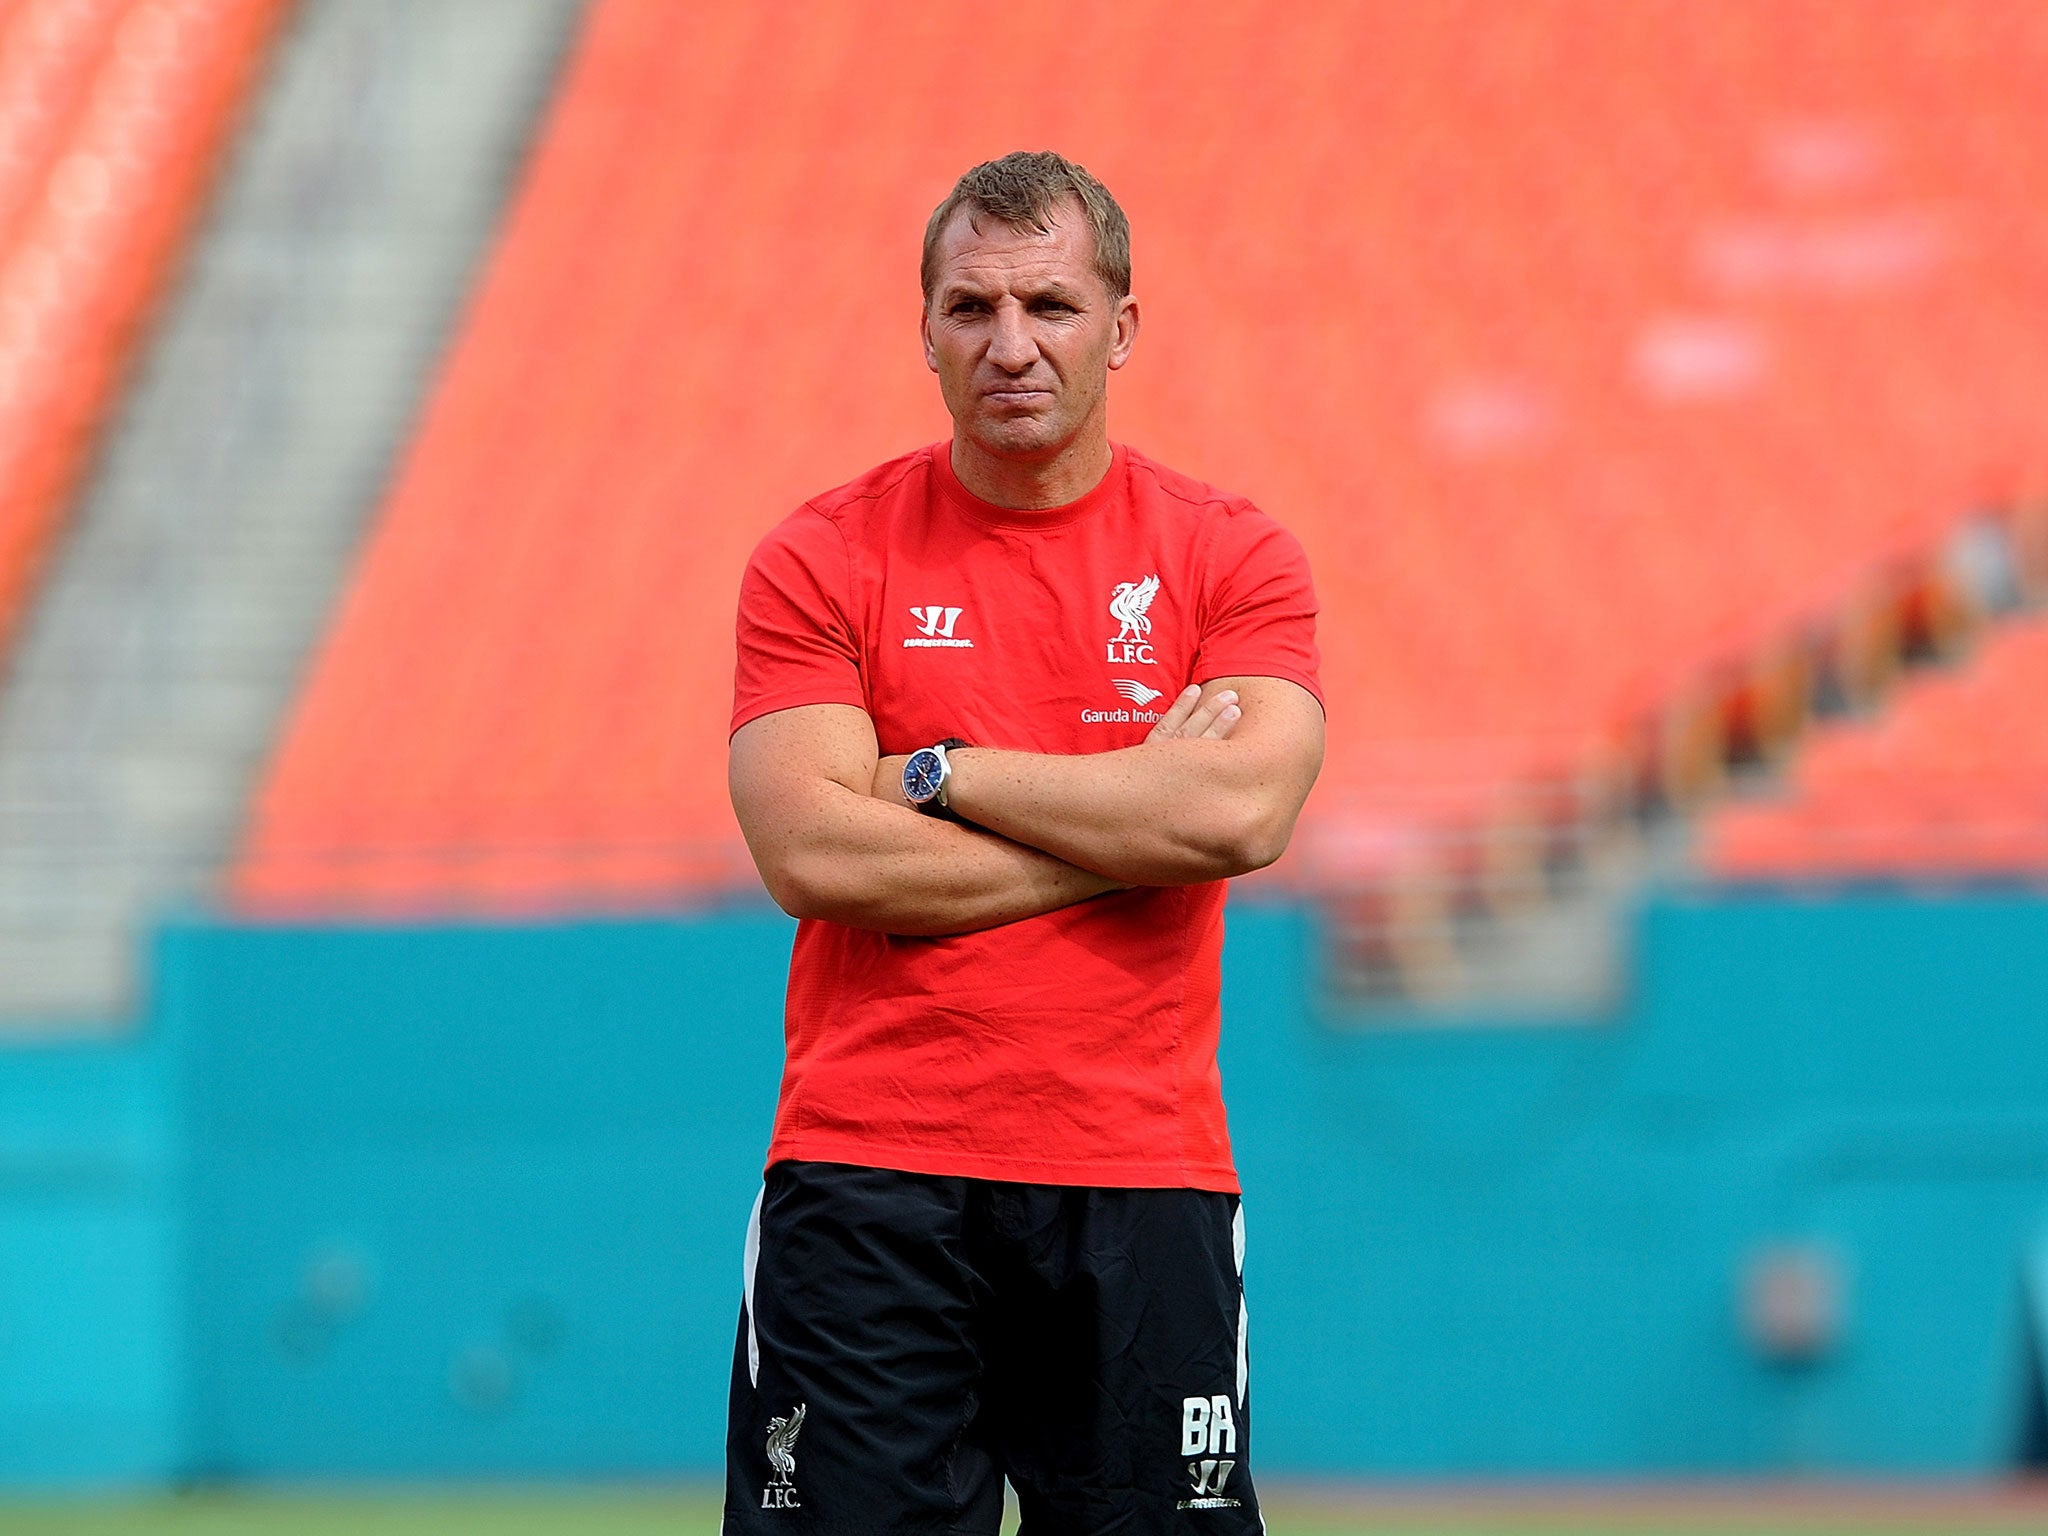 Brendan Rodgers watches training during Liverpool's tour of the United States